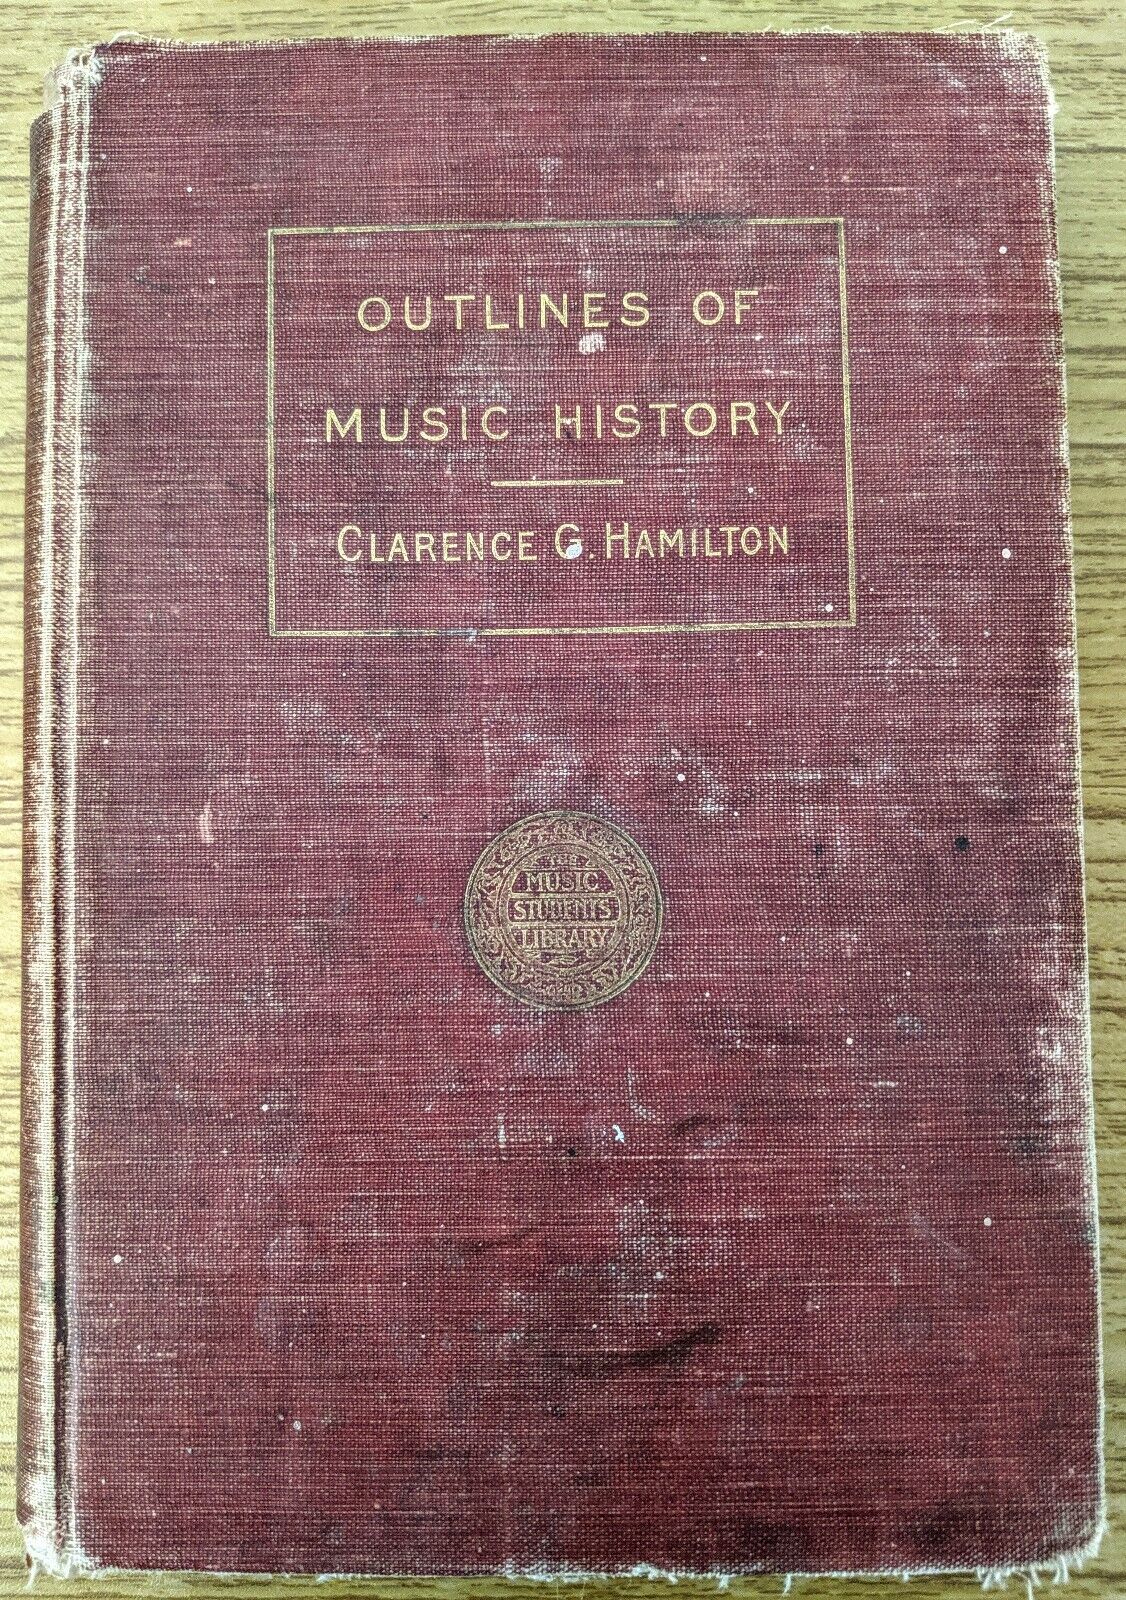 Outlines of Music History Book. 1908, Clarence Hamilton, Ditson Co. Pub.